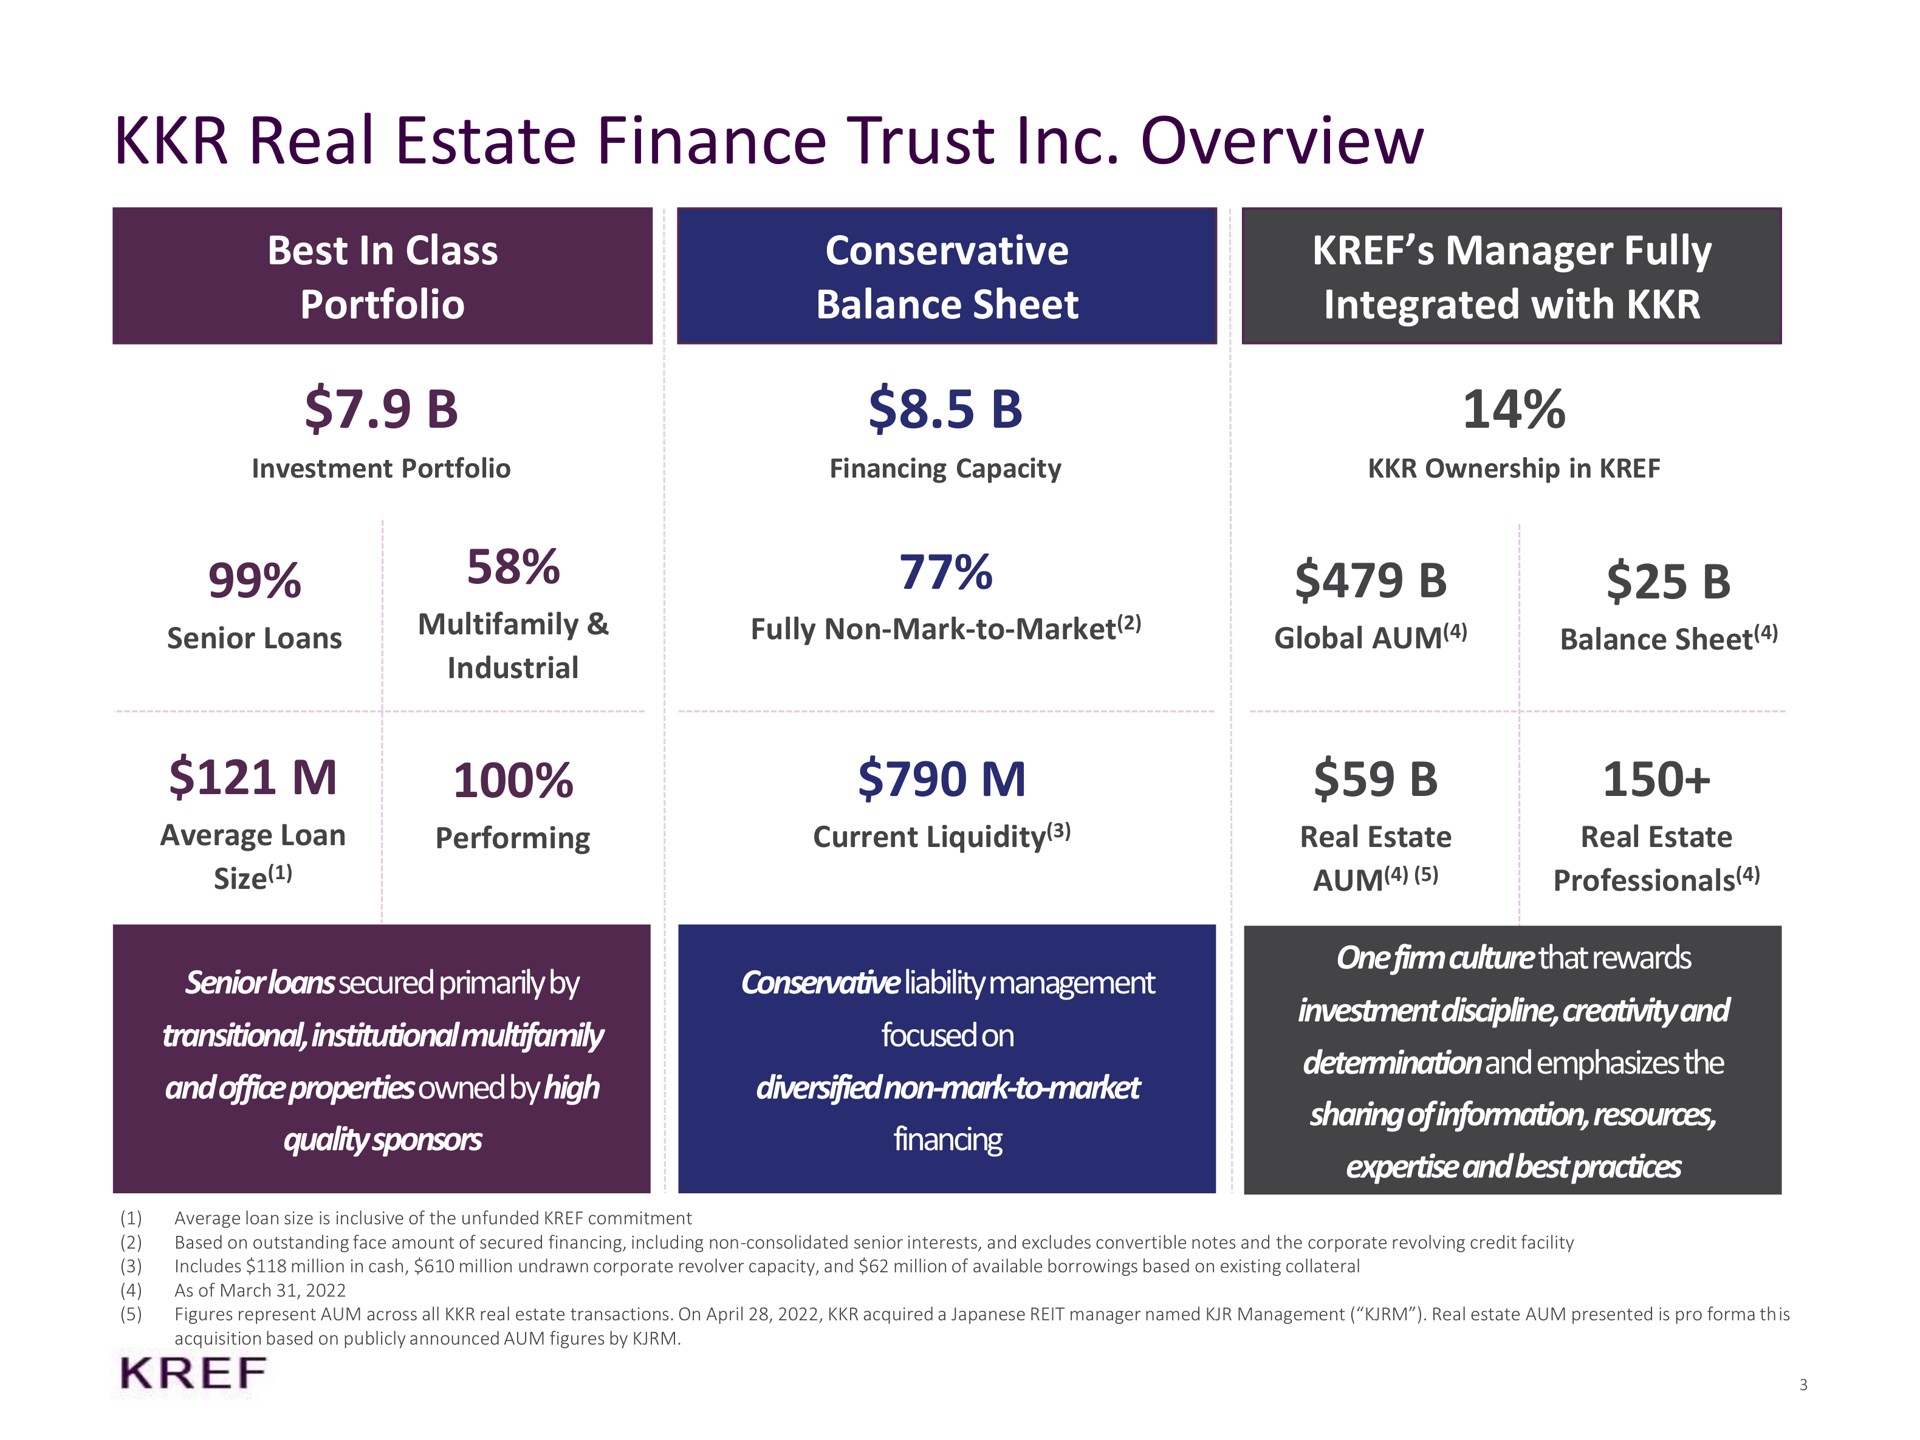 real estate finance trust overview best in class portfolio conservative balance sheet manager fully integrated with alert aum professionals average loan size performing current liquidity senior loans secured primarily by financing transitional institutional and office properties owned by high investment discipline liability management sharing of information resources diversified non mark to market one firm culture that rewards quality sponsors a | KKR Real Estate Finance Trust